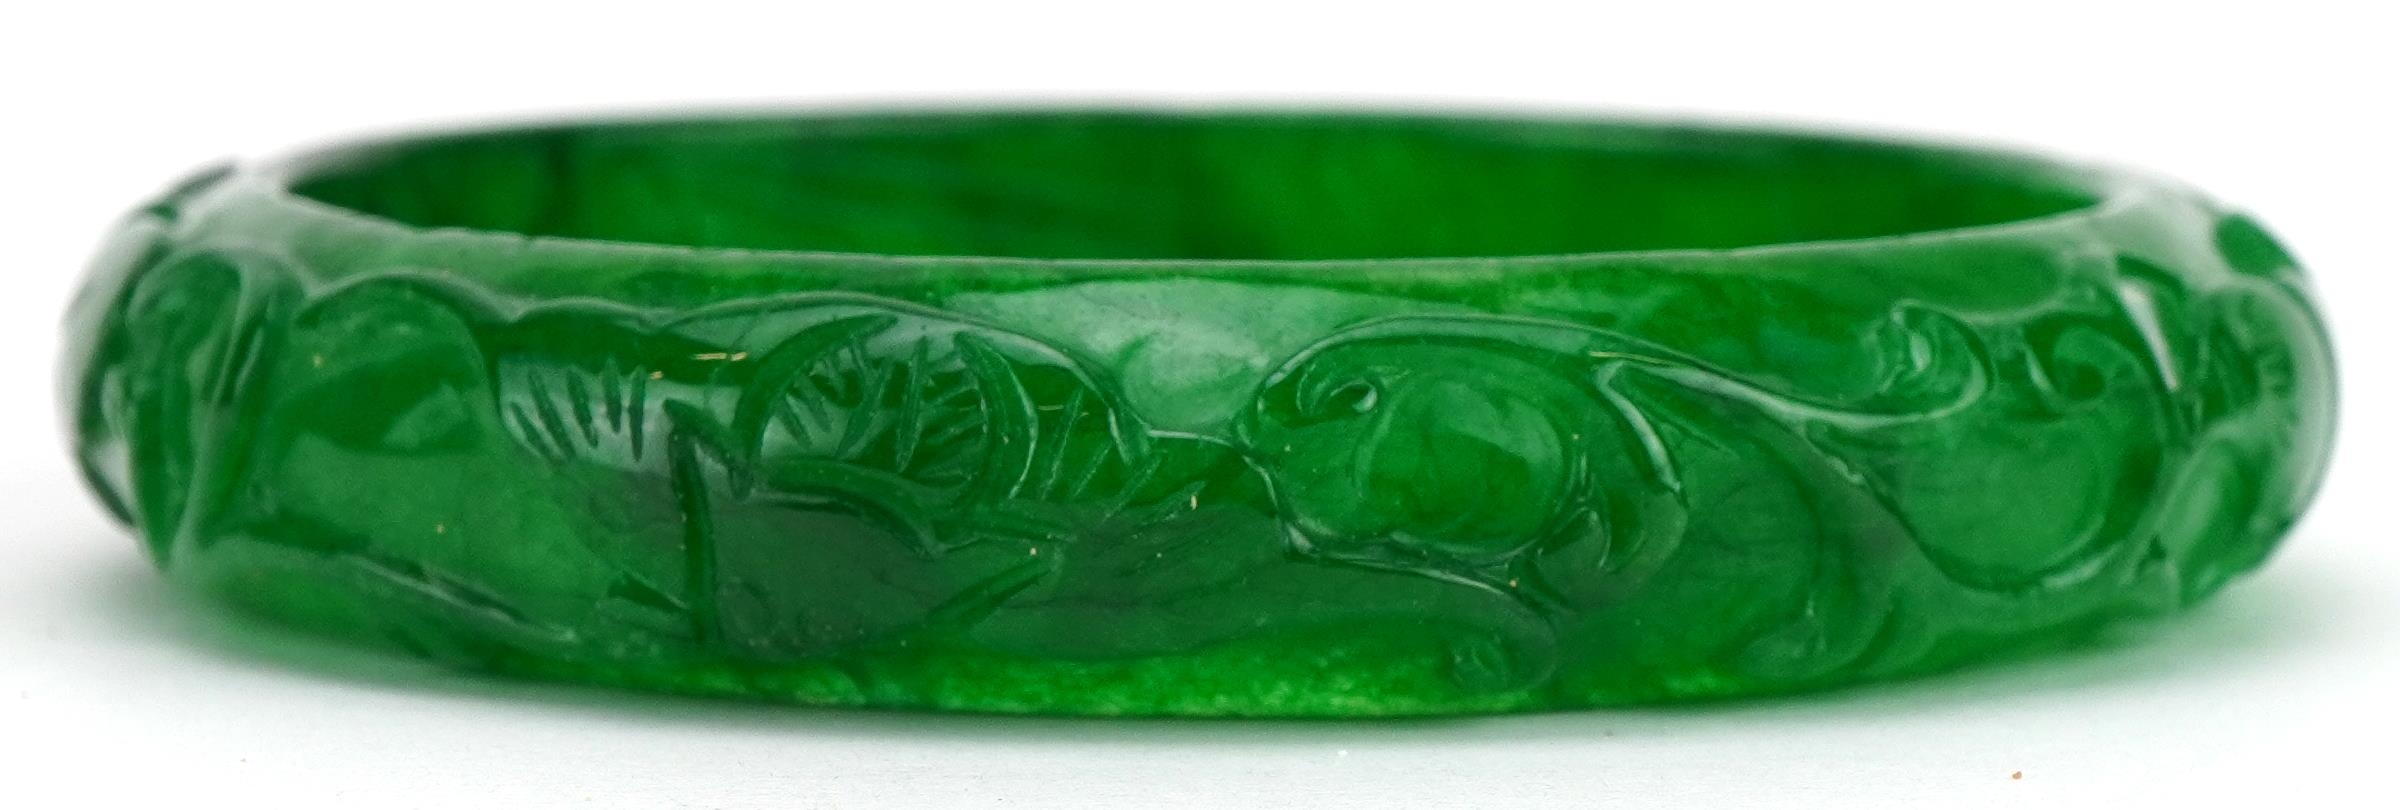 Chinese green jade bangle carved with foliage, 7cm in diameter, 46.8g - Image 2 of 2